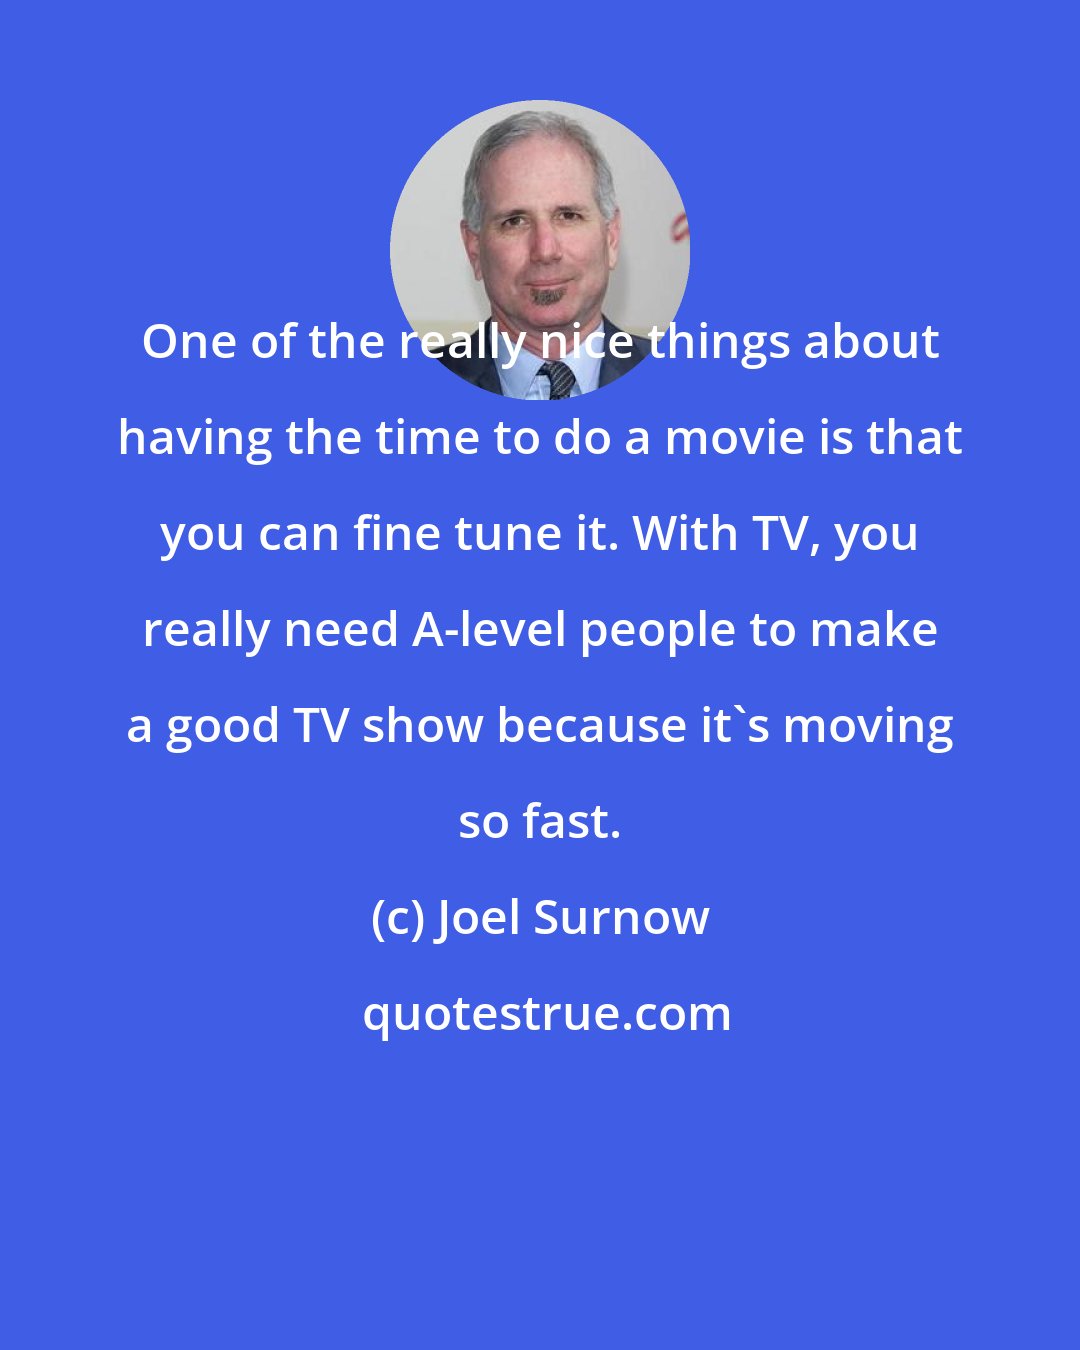 Joel Surnow: One of the really nice things about having the time to do a movie is that you can fine tune it. With TV, you really need A-level people to make a good TV show because it's moving so fast.